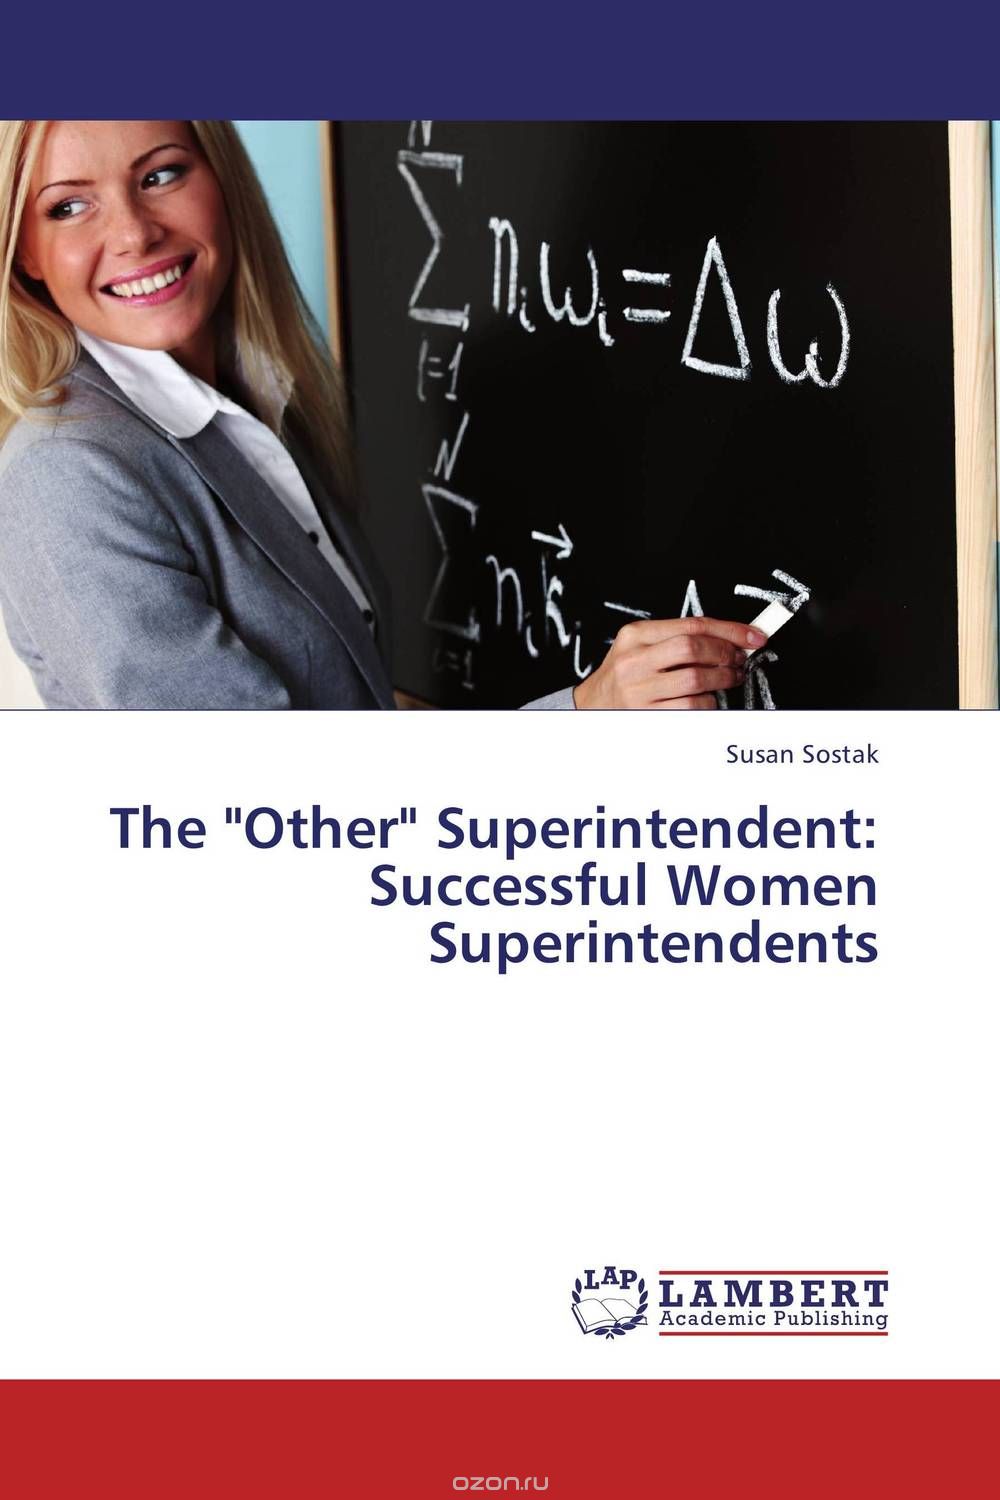 The "Other" Superintendent: Successful Women Superintendents